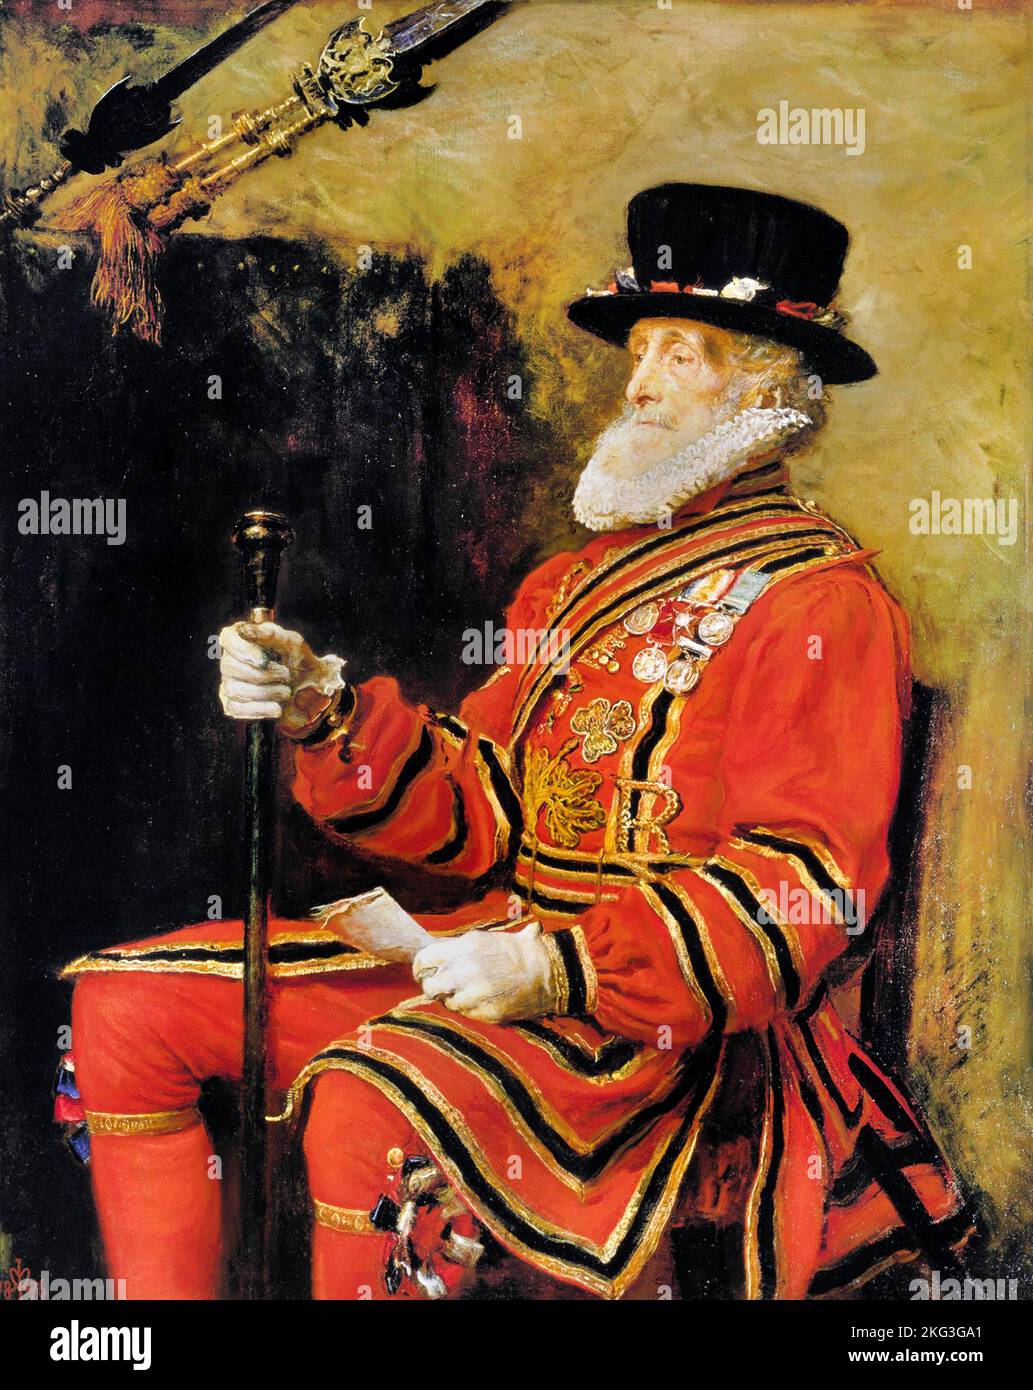 John Everett Millais; The Yeoman of the Guard; 1878; Oil on Canvas; Tate Britain, Londres, Angleterre. Banque D'Images